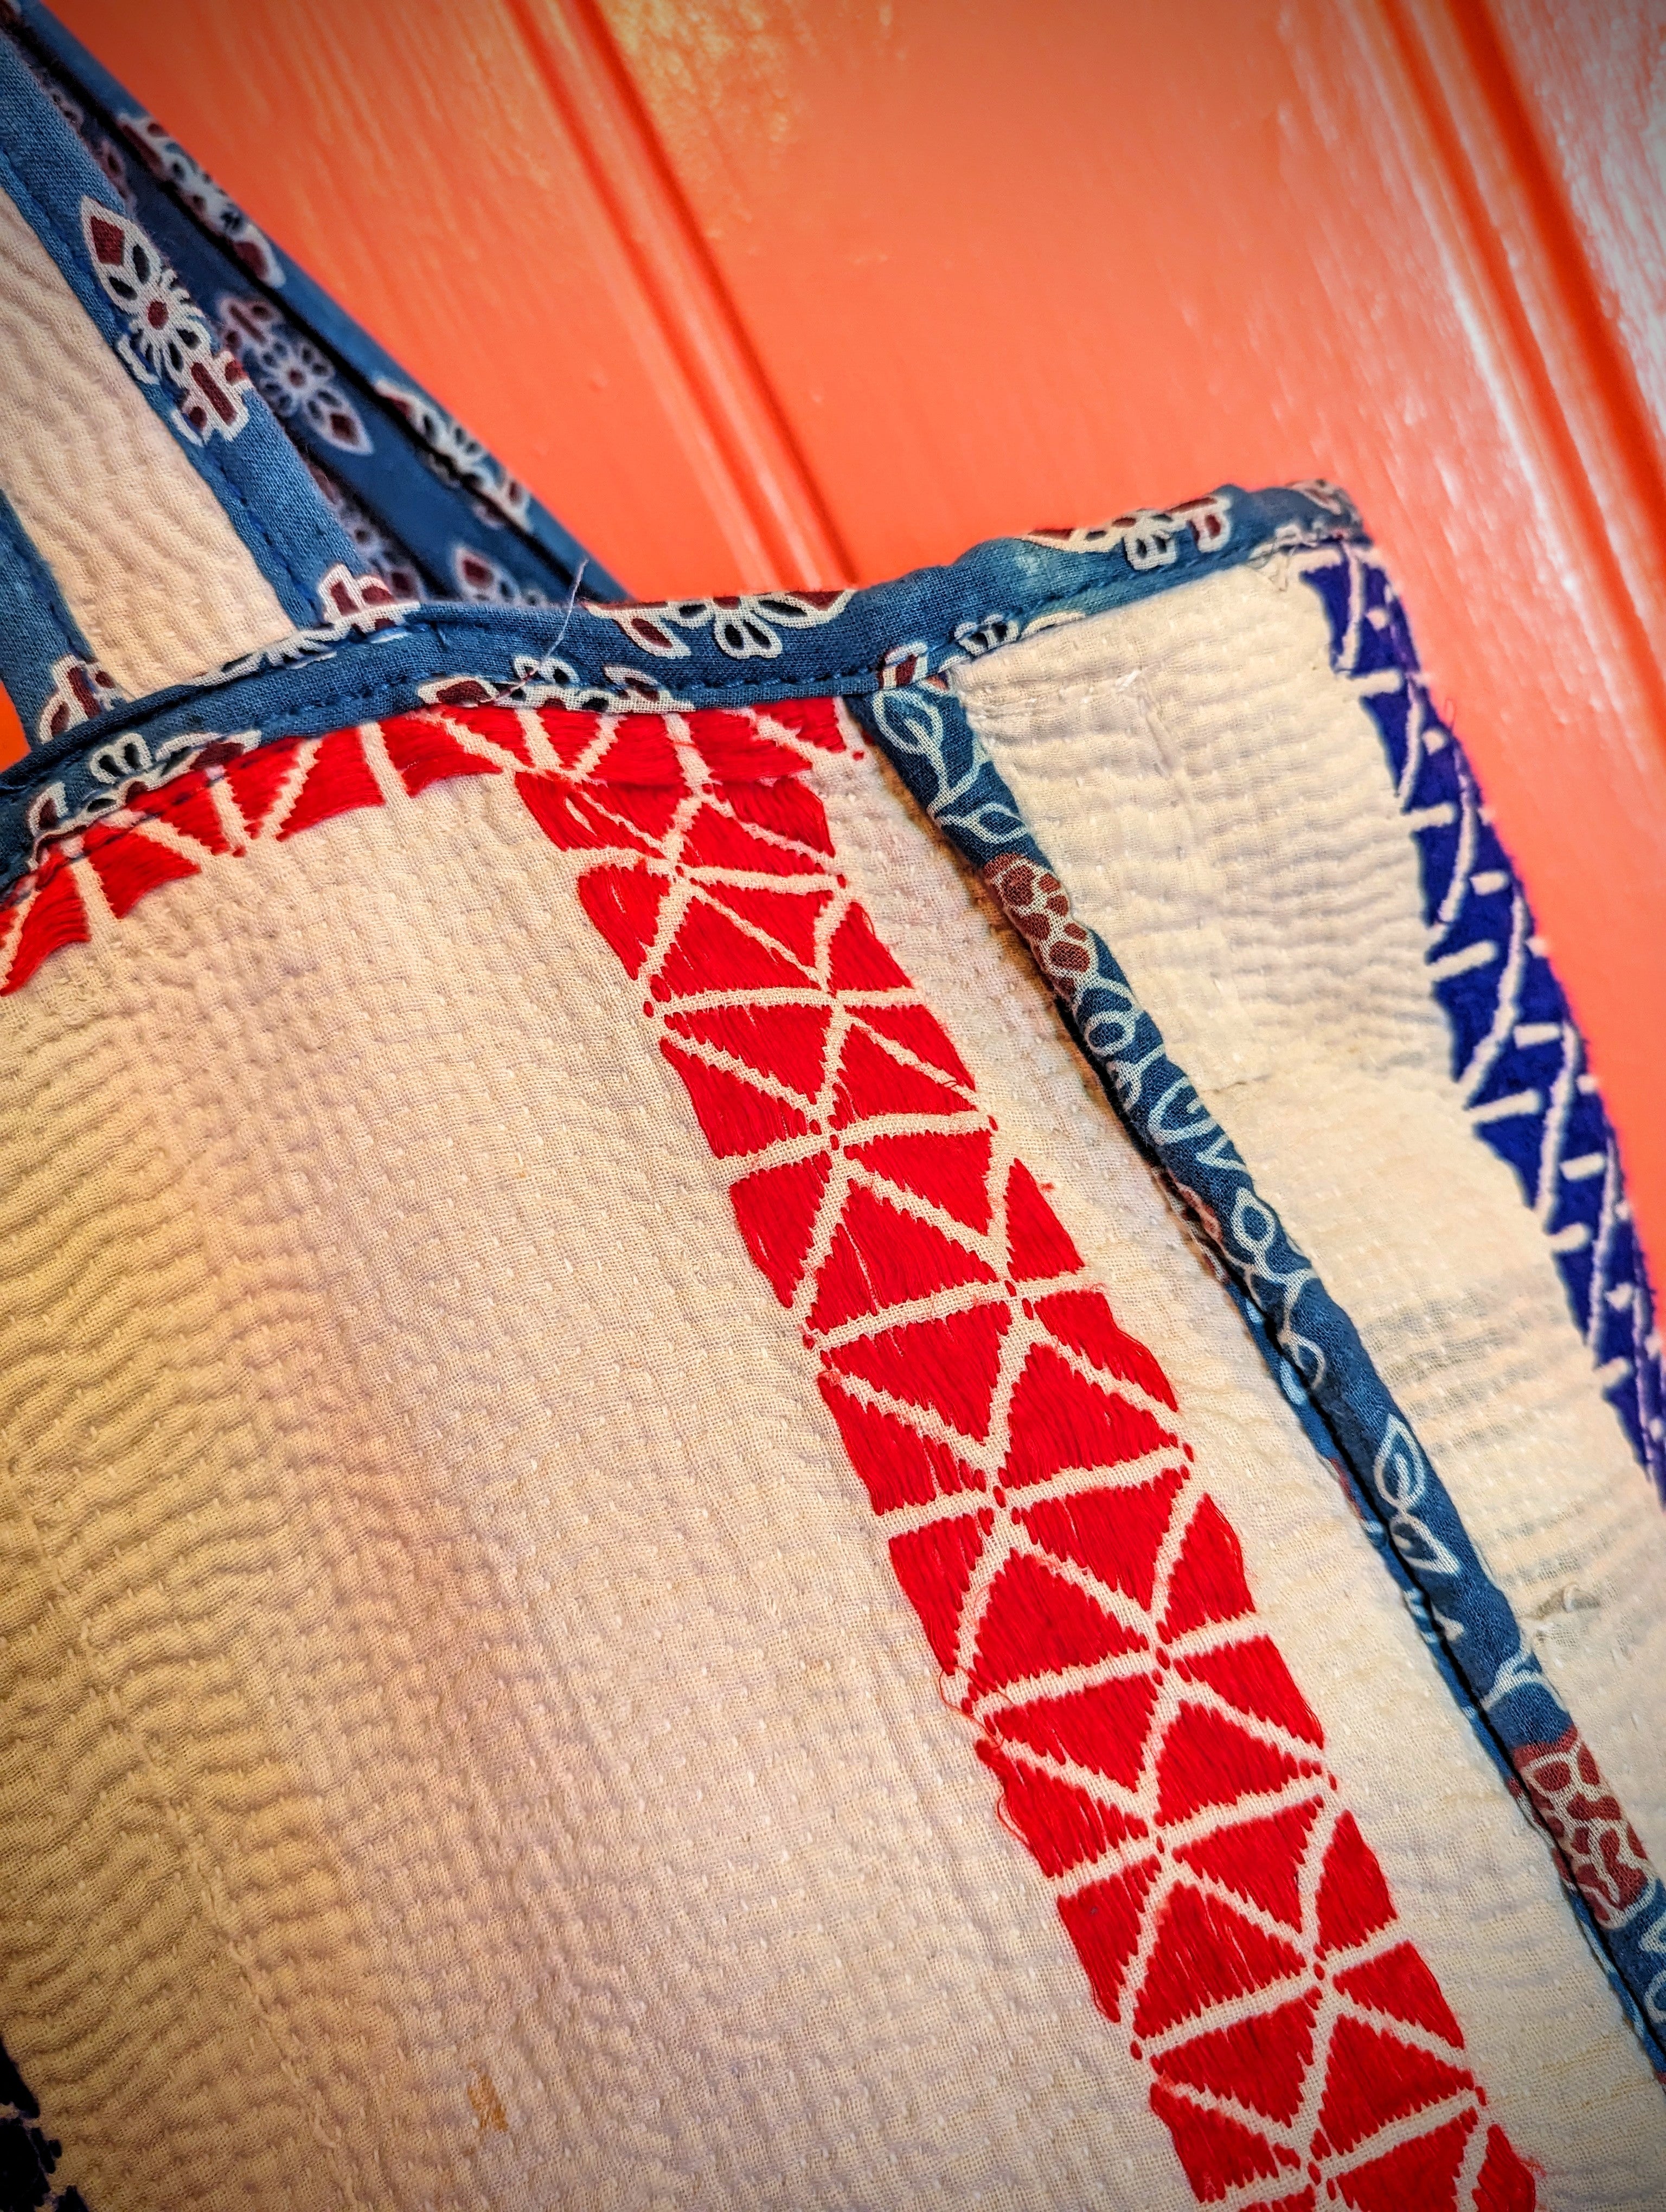 Vintage upcycled kantha bags